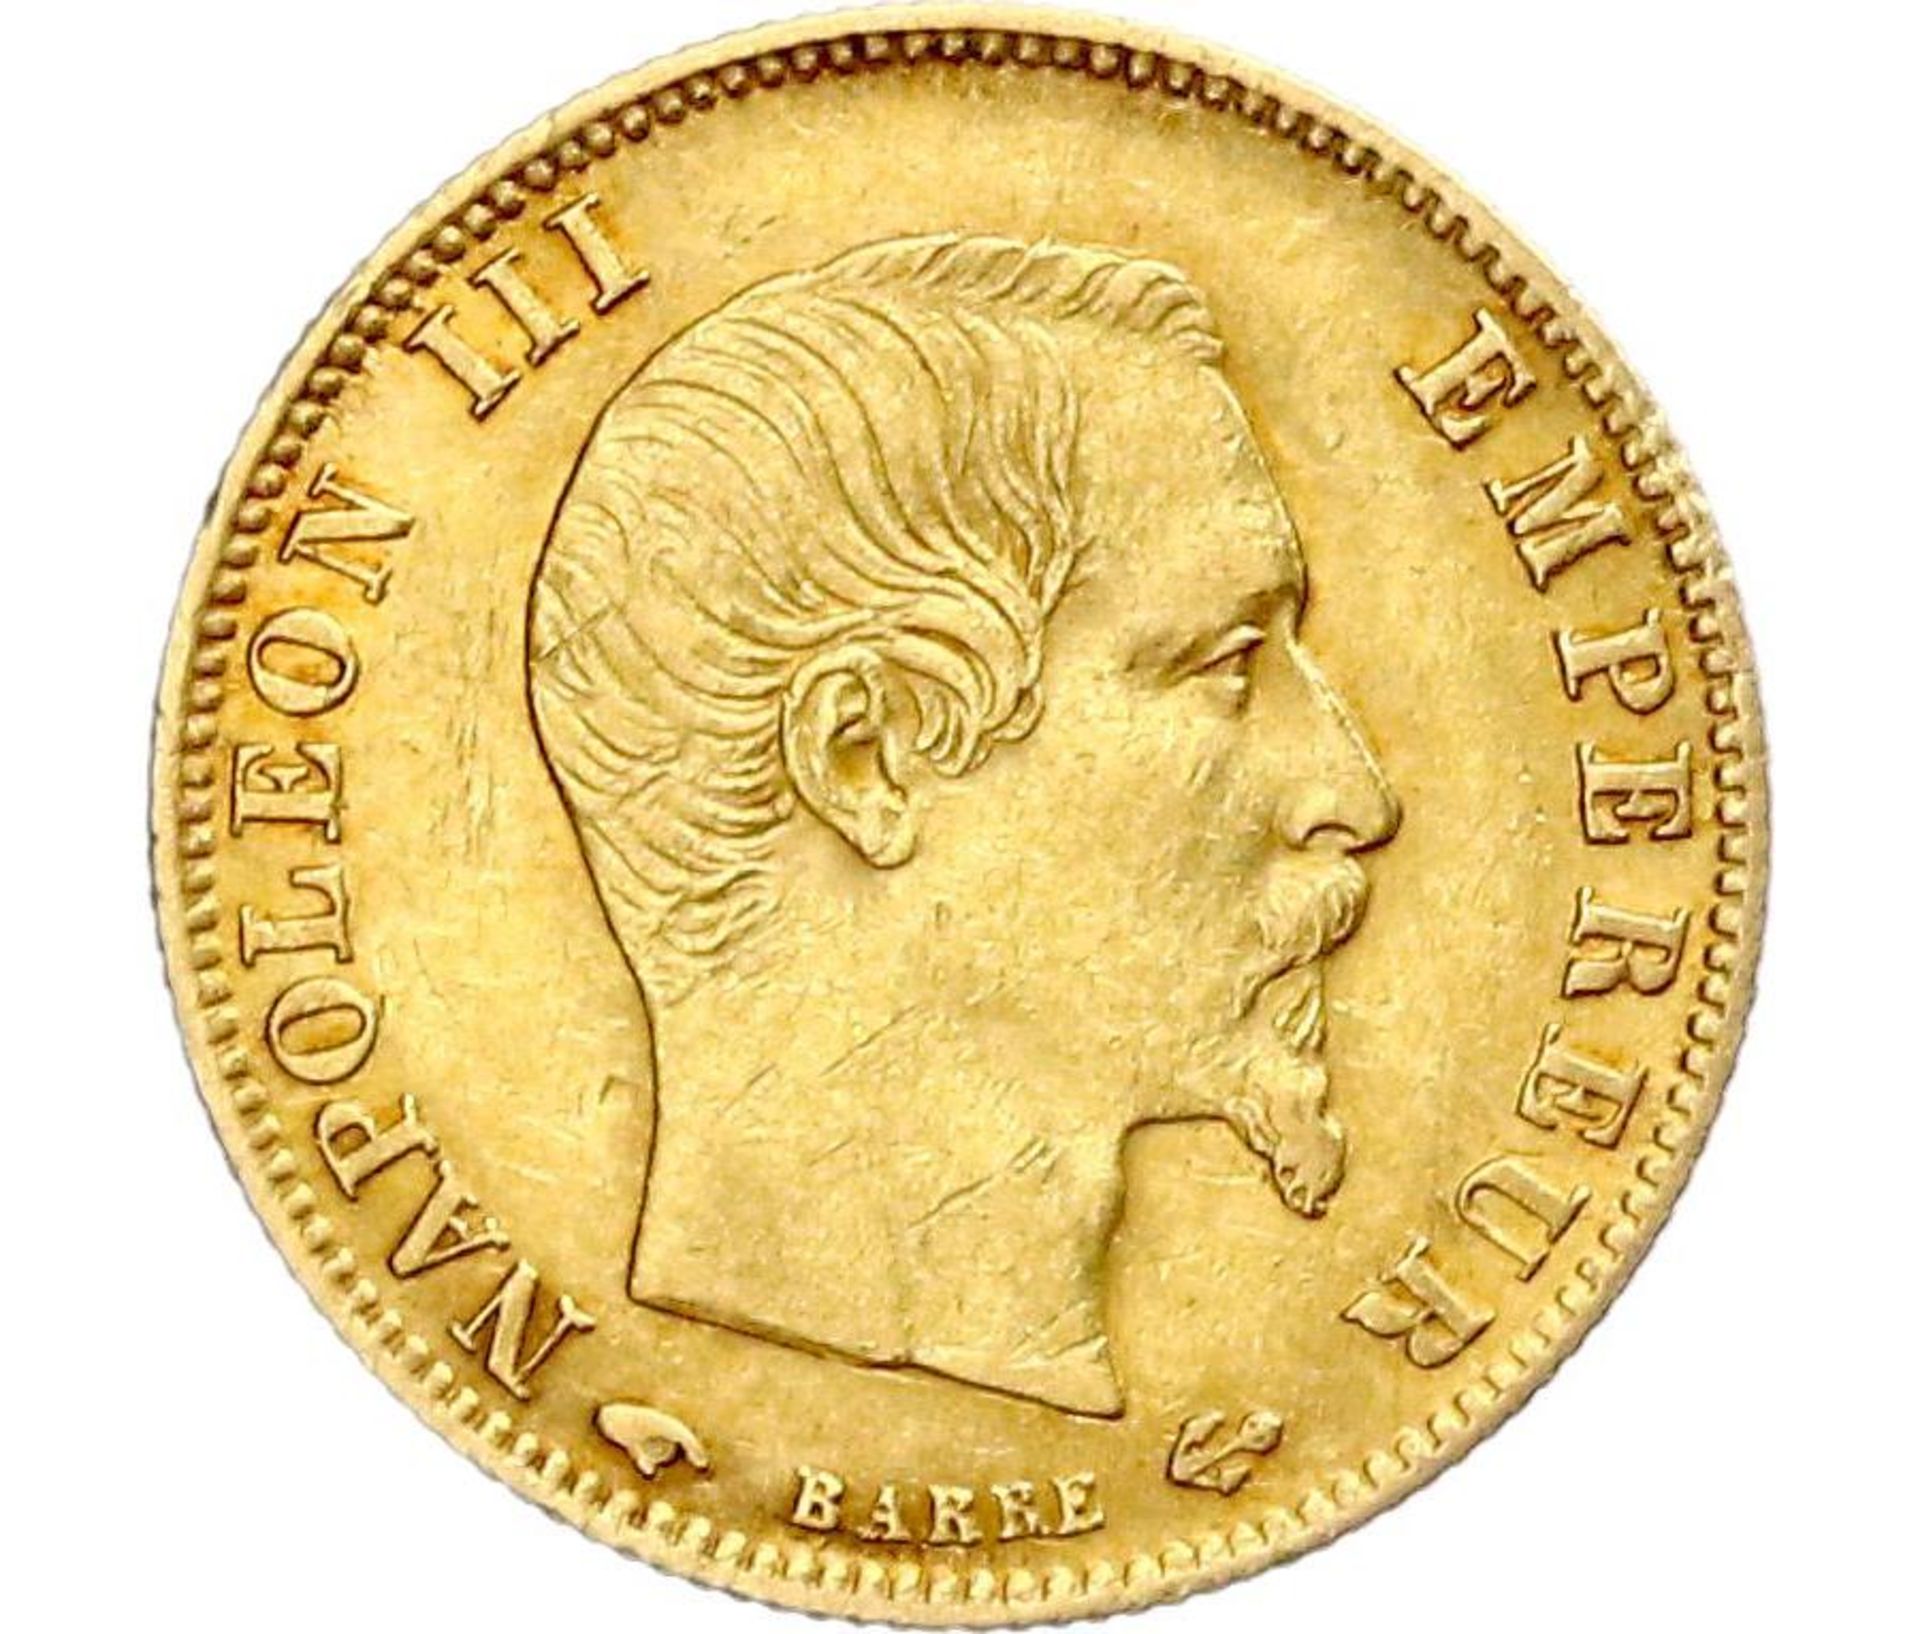 1860 - 5 Francs A - Paris - Solid Gold - Extremely fine - Image 2 of 2